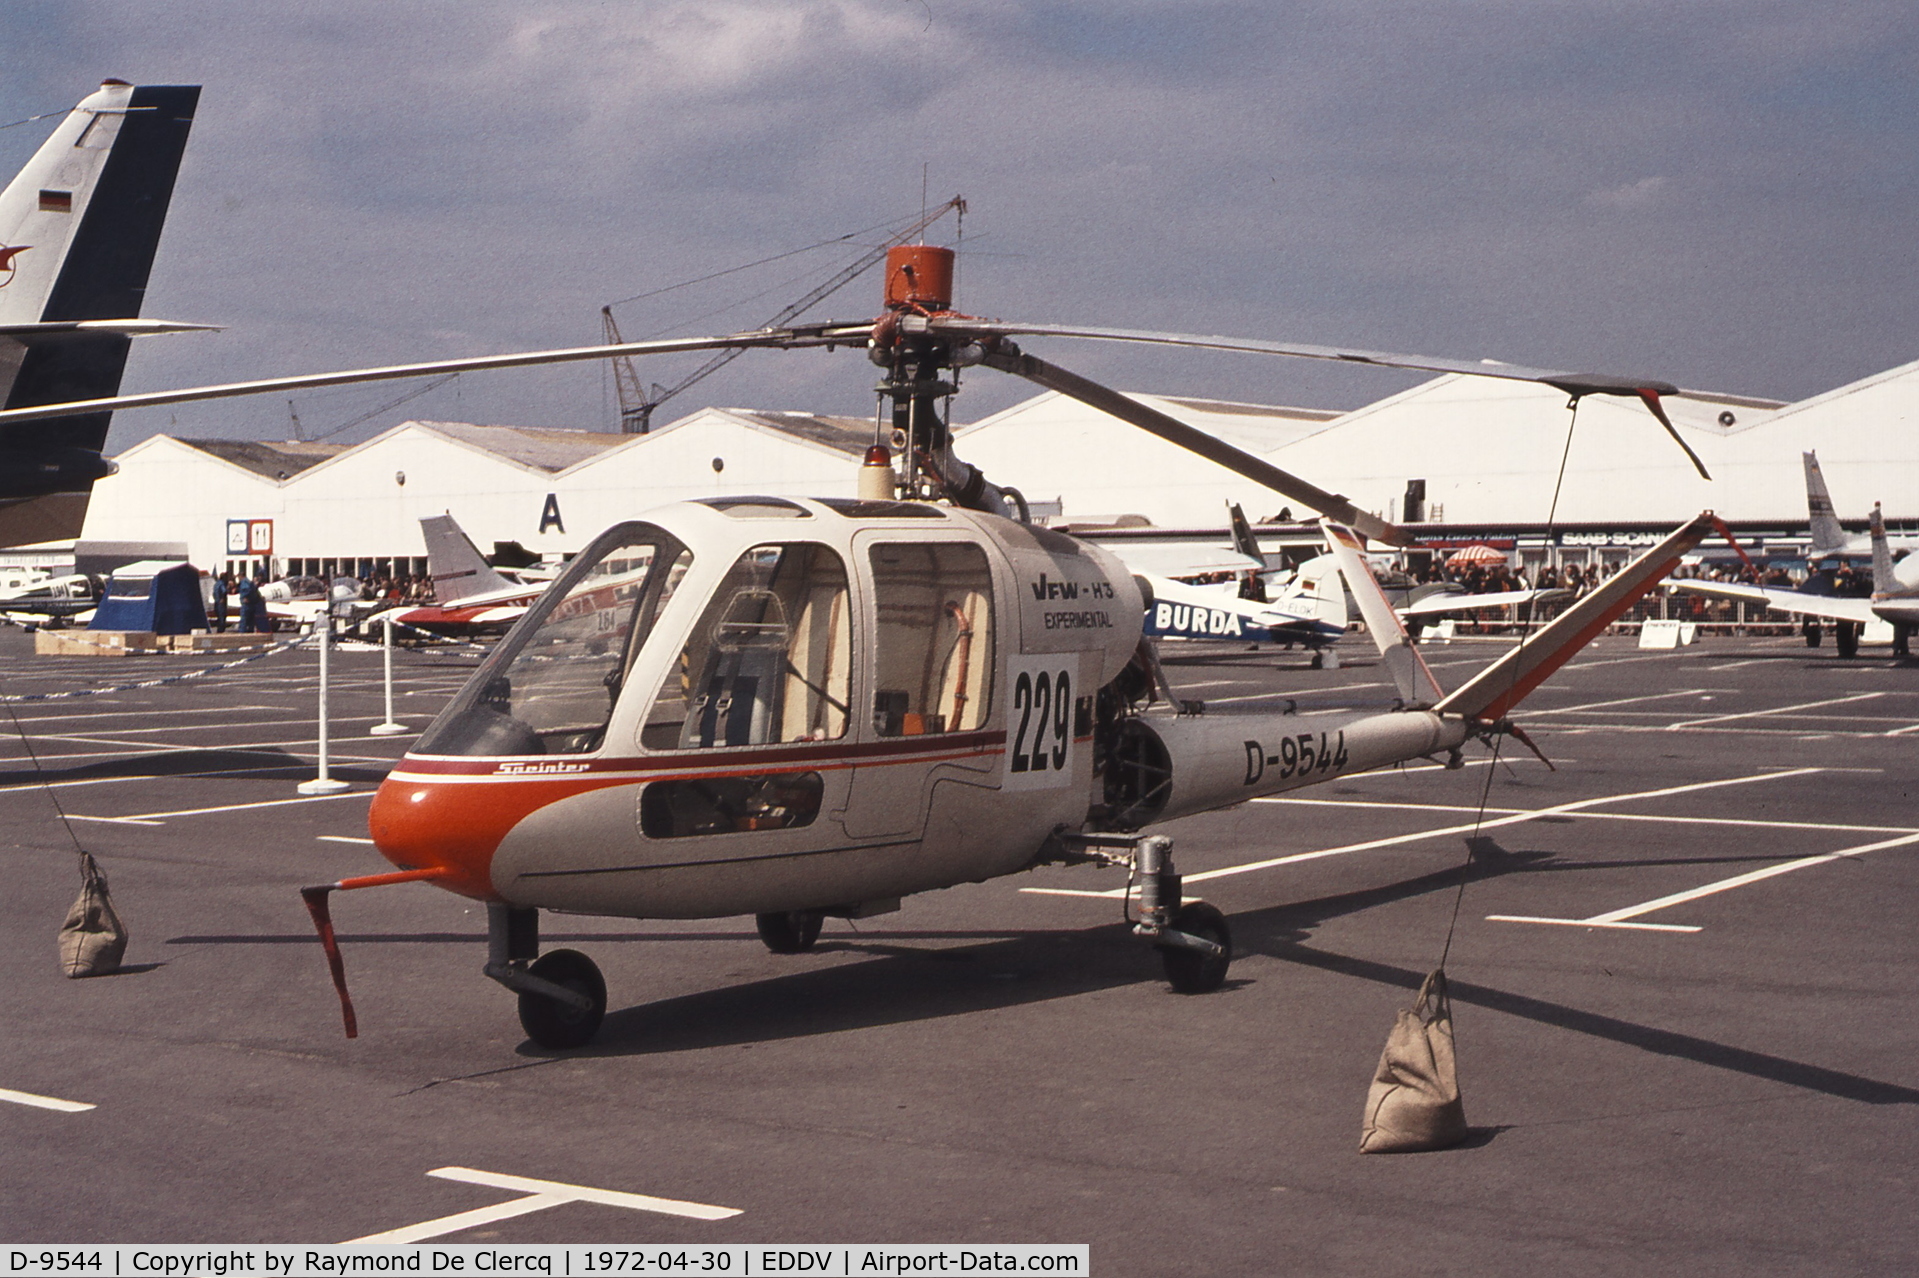 D-9544, 1971 VFW H-3 C/N E-2, Hannover Messe 1972